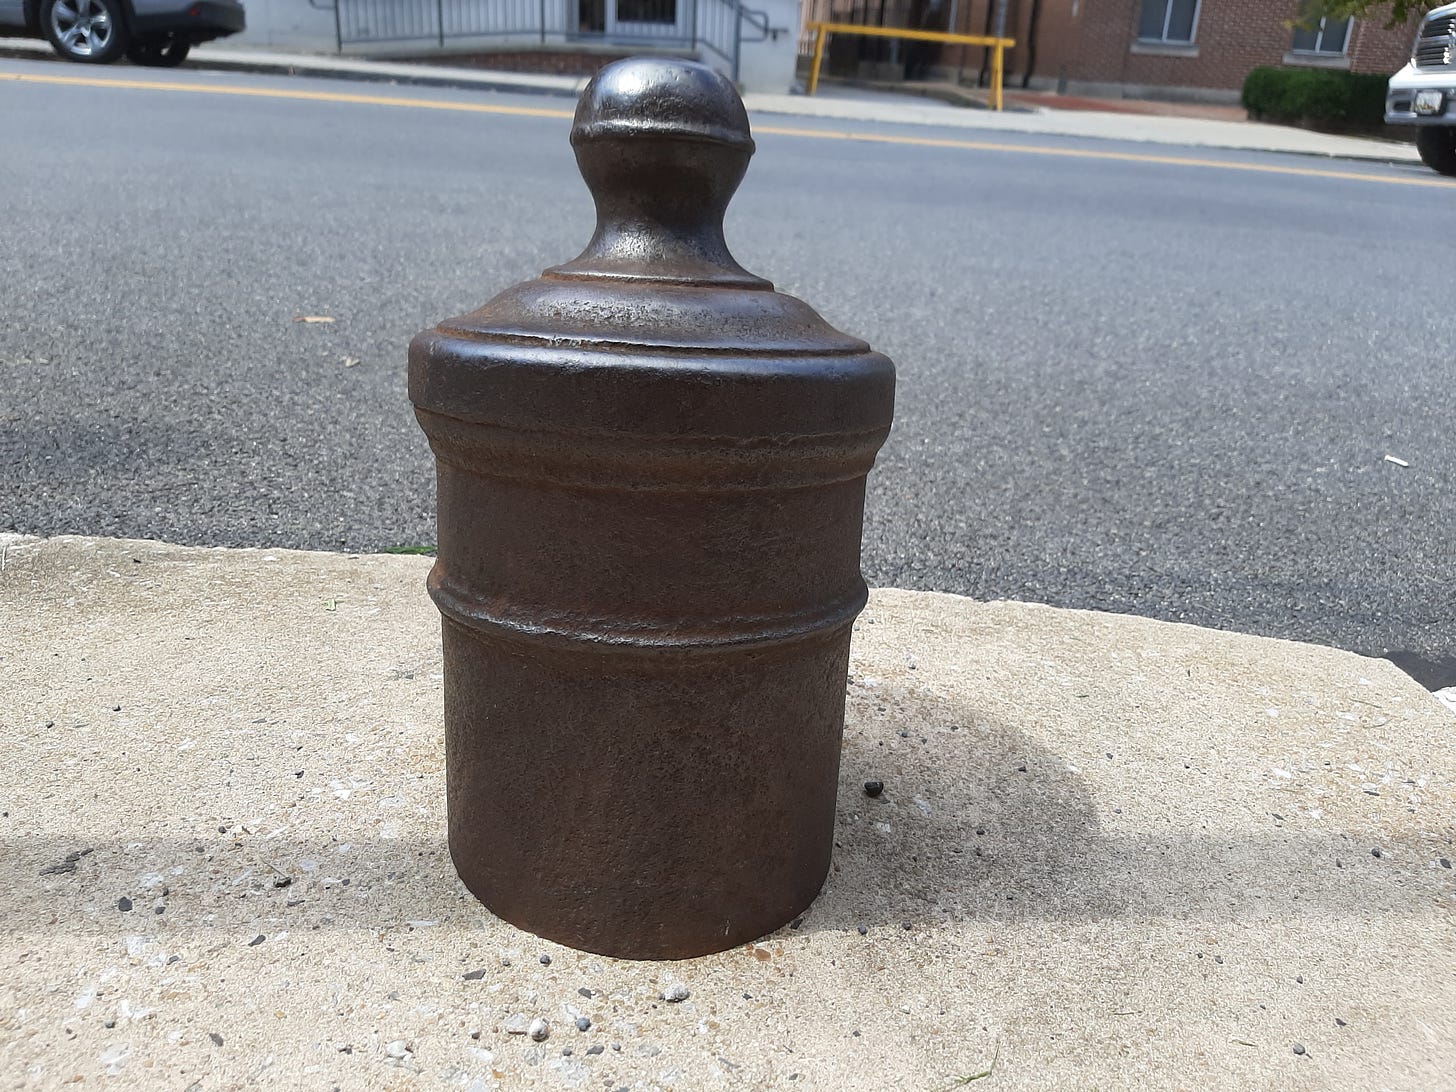 top of cannon sticking out of sidewalk.